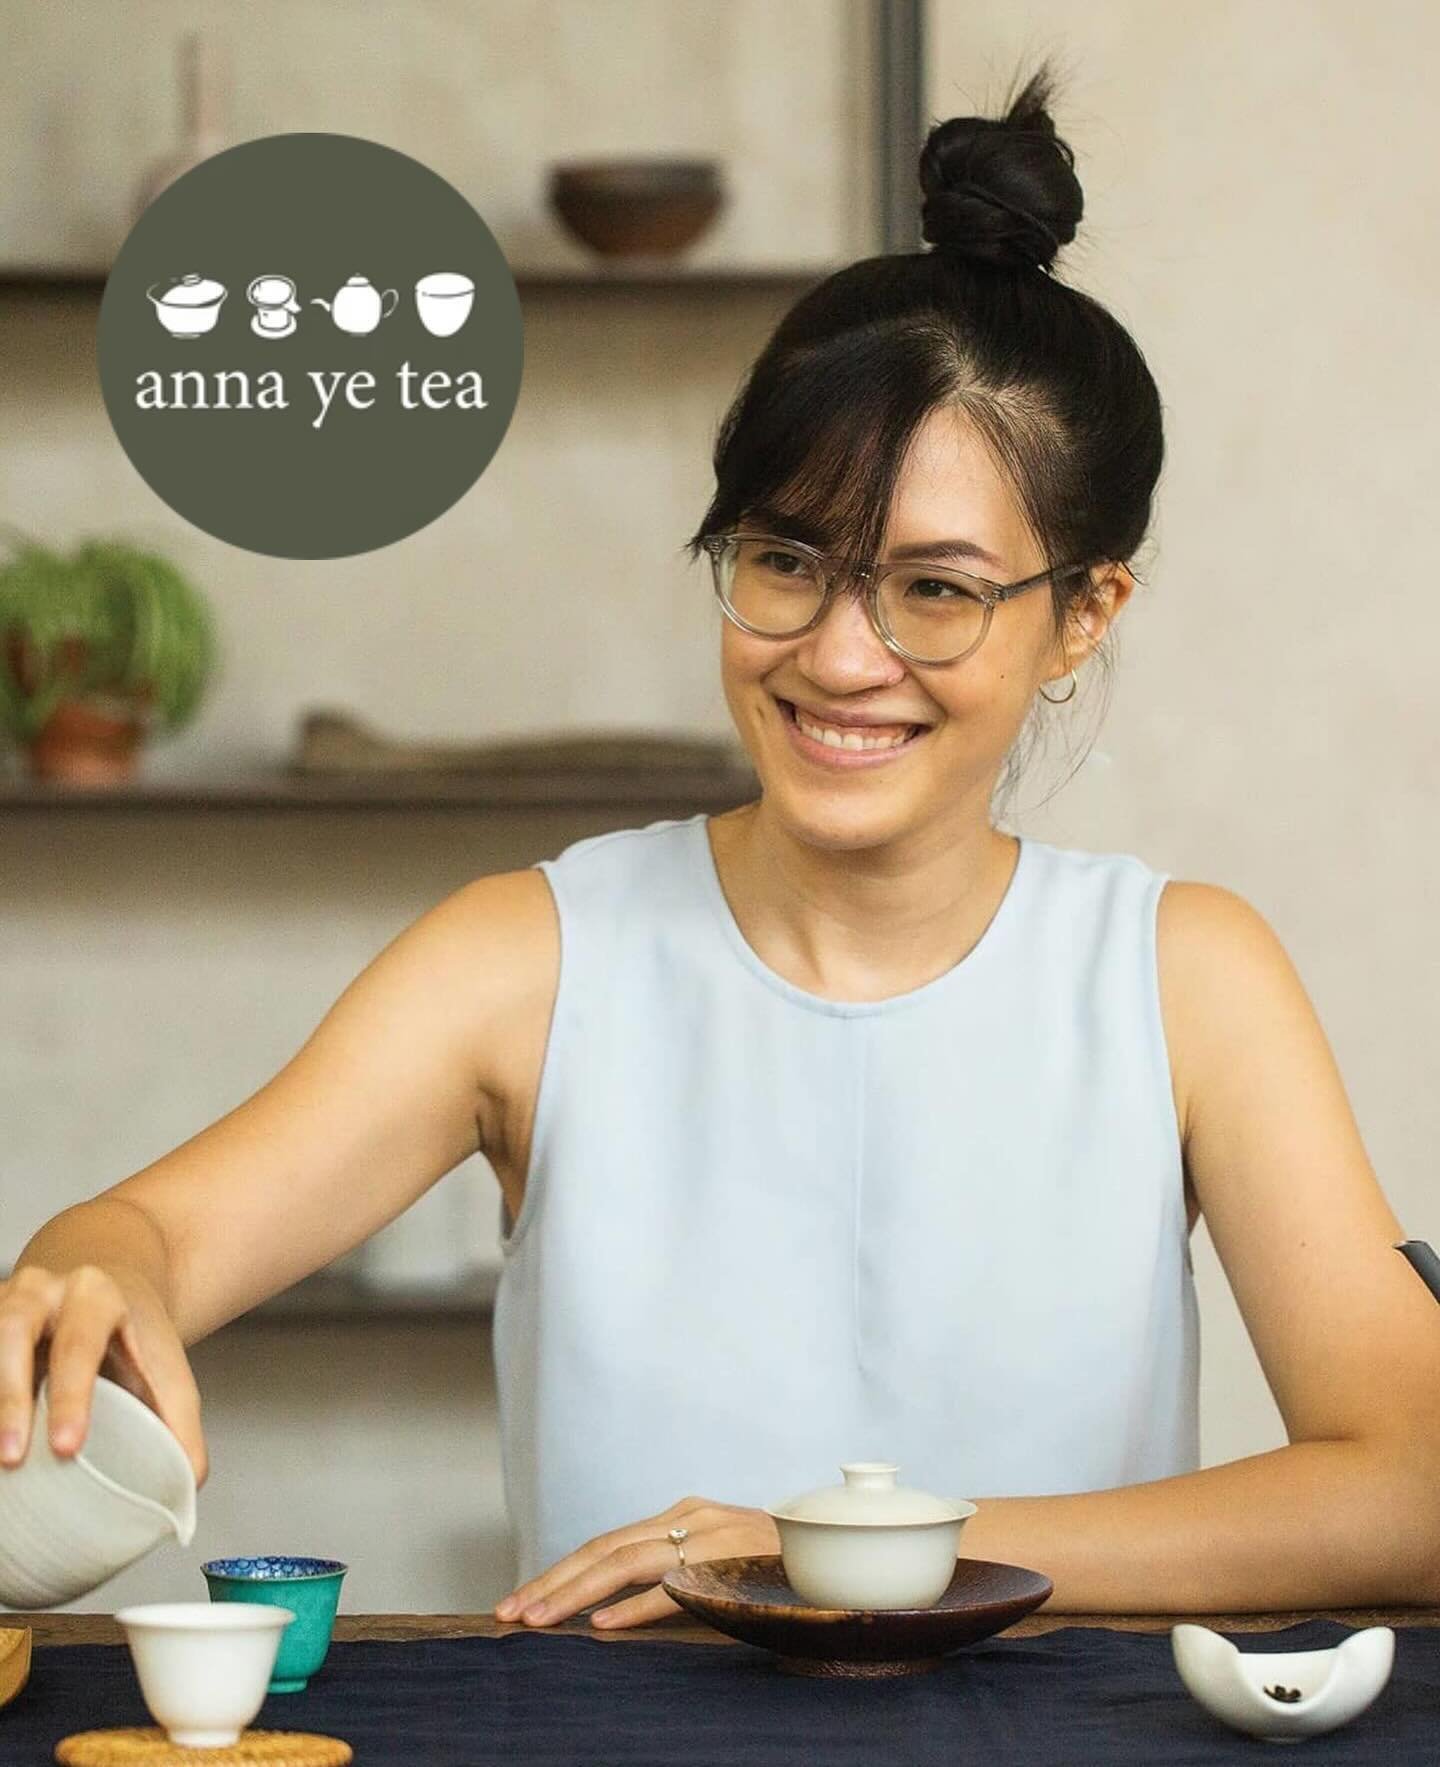 Producer feature for our next culinary industry night on Monday, May 13th 🍃

@annaye.tea was founded by Anna Ye, a 1st generation Chinese-American born to immigrant parents. They are a specialty tea company based in Queens, New York proudly importin